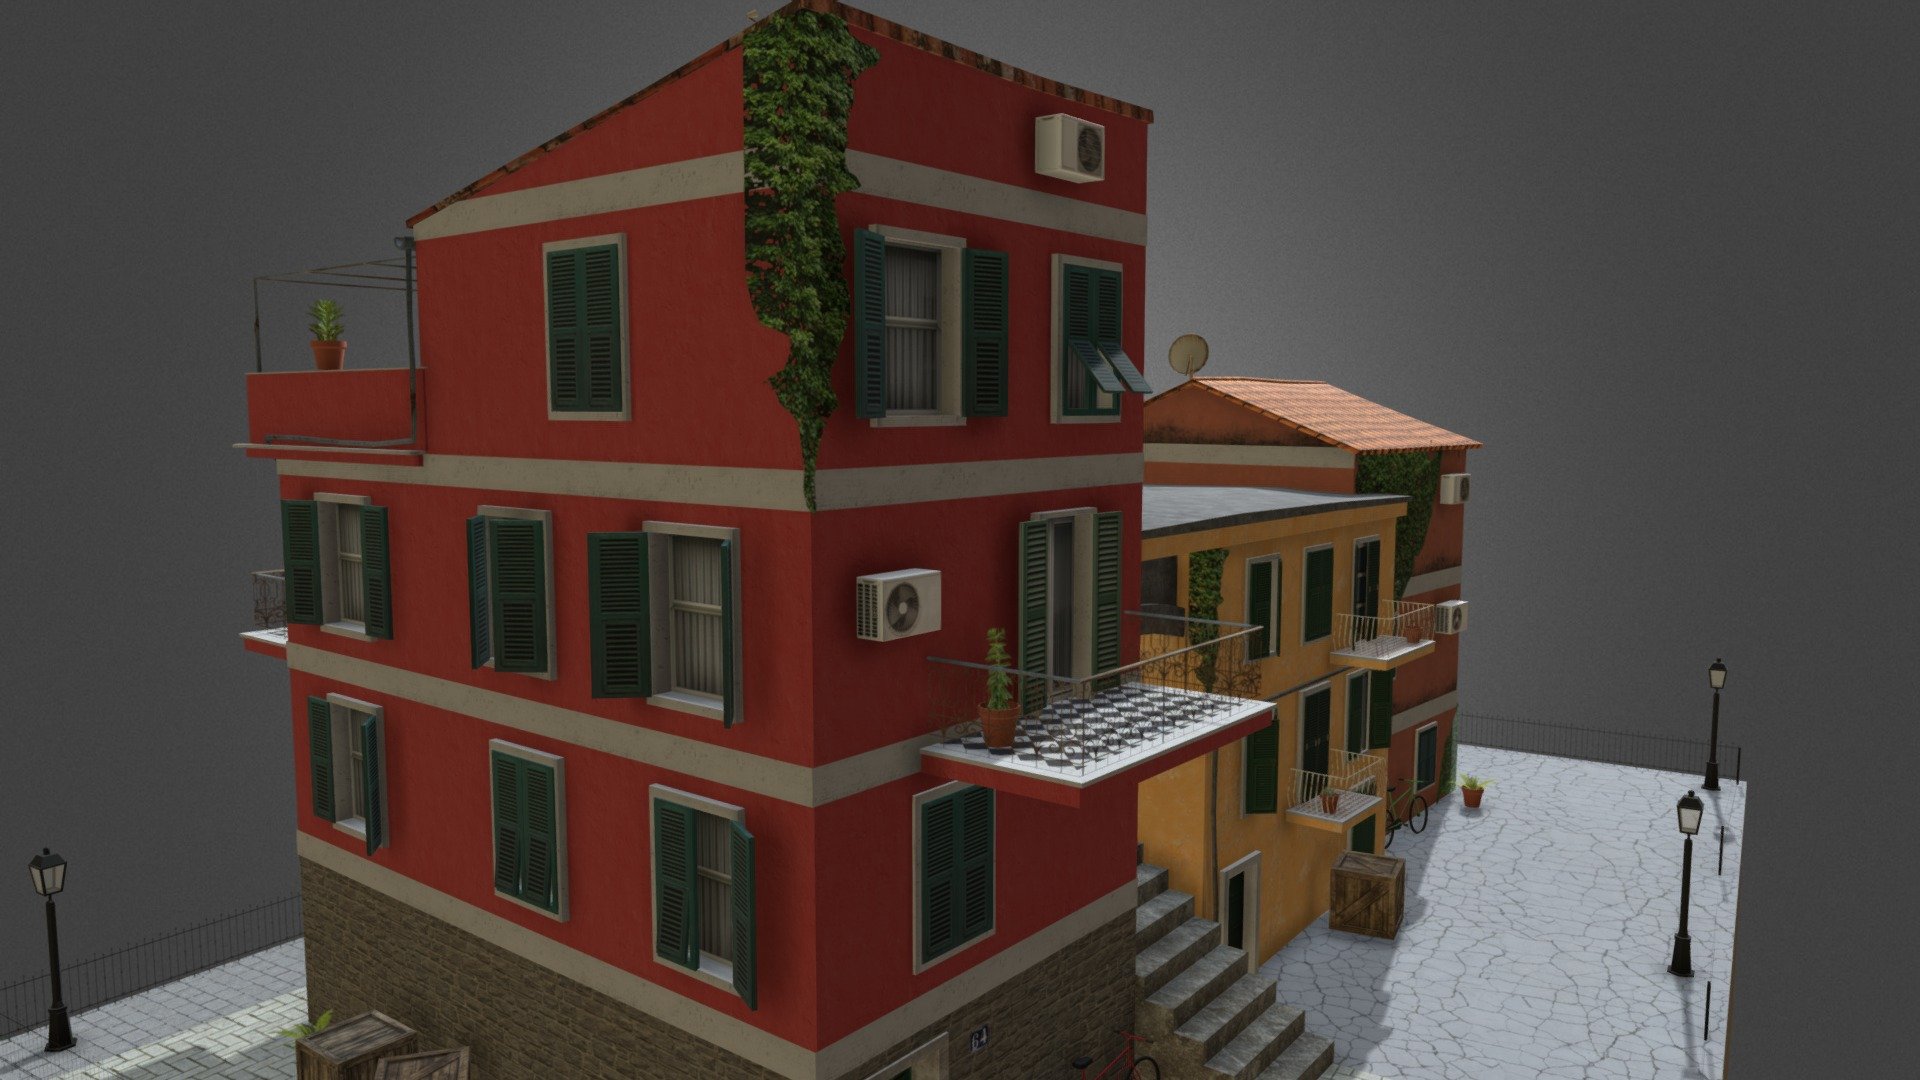 First Semester, 3D LowPoly Assignment at DAE.

Cinque Terre Low Poly City Scene - Cinque Terre - City Scene - 3D model by Tuncay Balikel (@TuncayB) 3d model